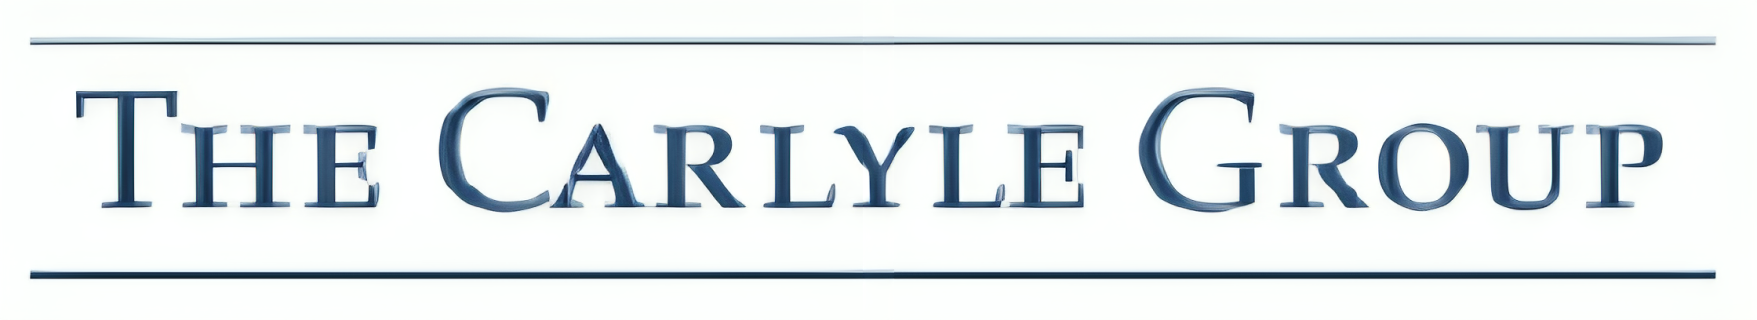 the-carlyle-group-logo